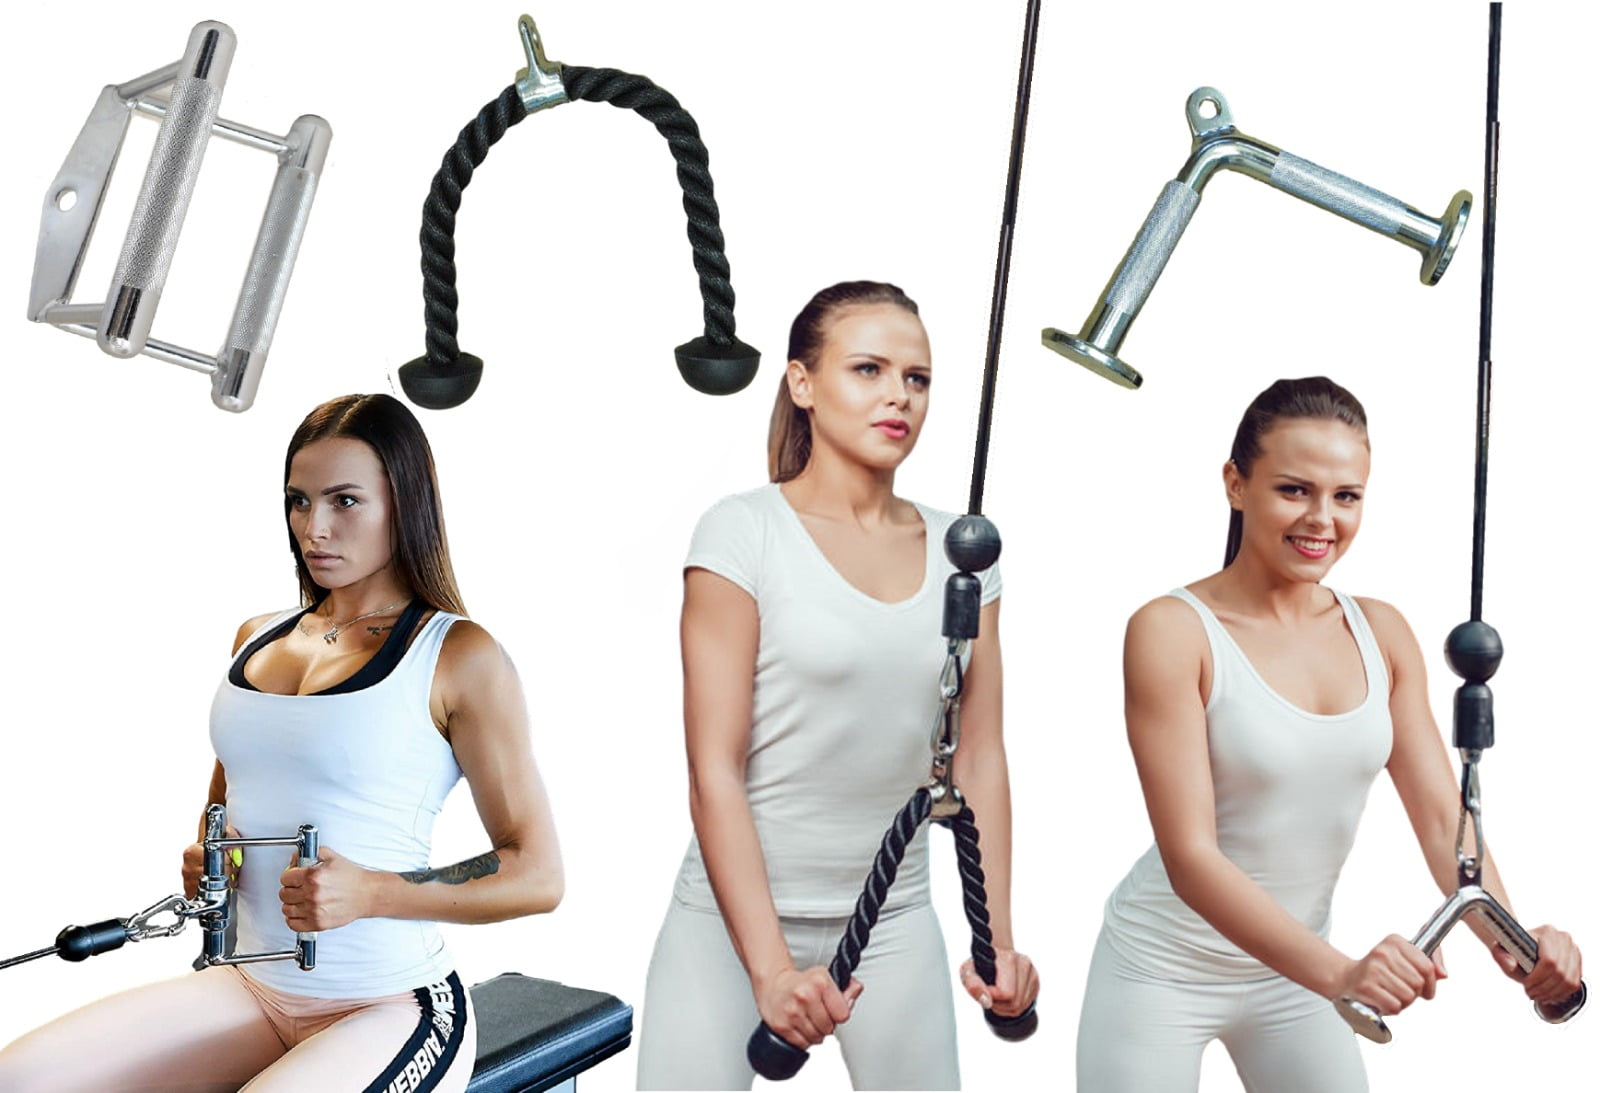 Upgraded LAT Pulldown Bars Curl Triceps Press Down Bar Handle LAT Bar Cable Machine Attachment for Pulley System Rowing LAT Pull Down Bar 19 LAT Pull Down Bar Attachments for Home Gym 